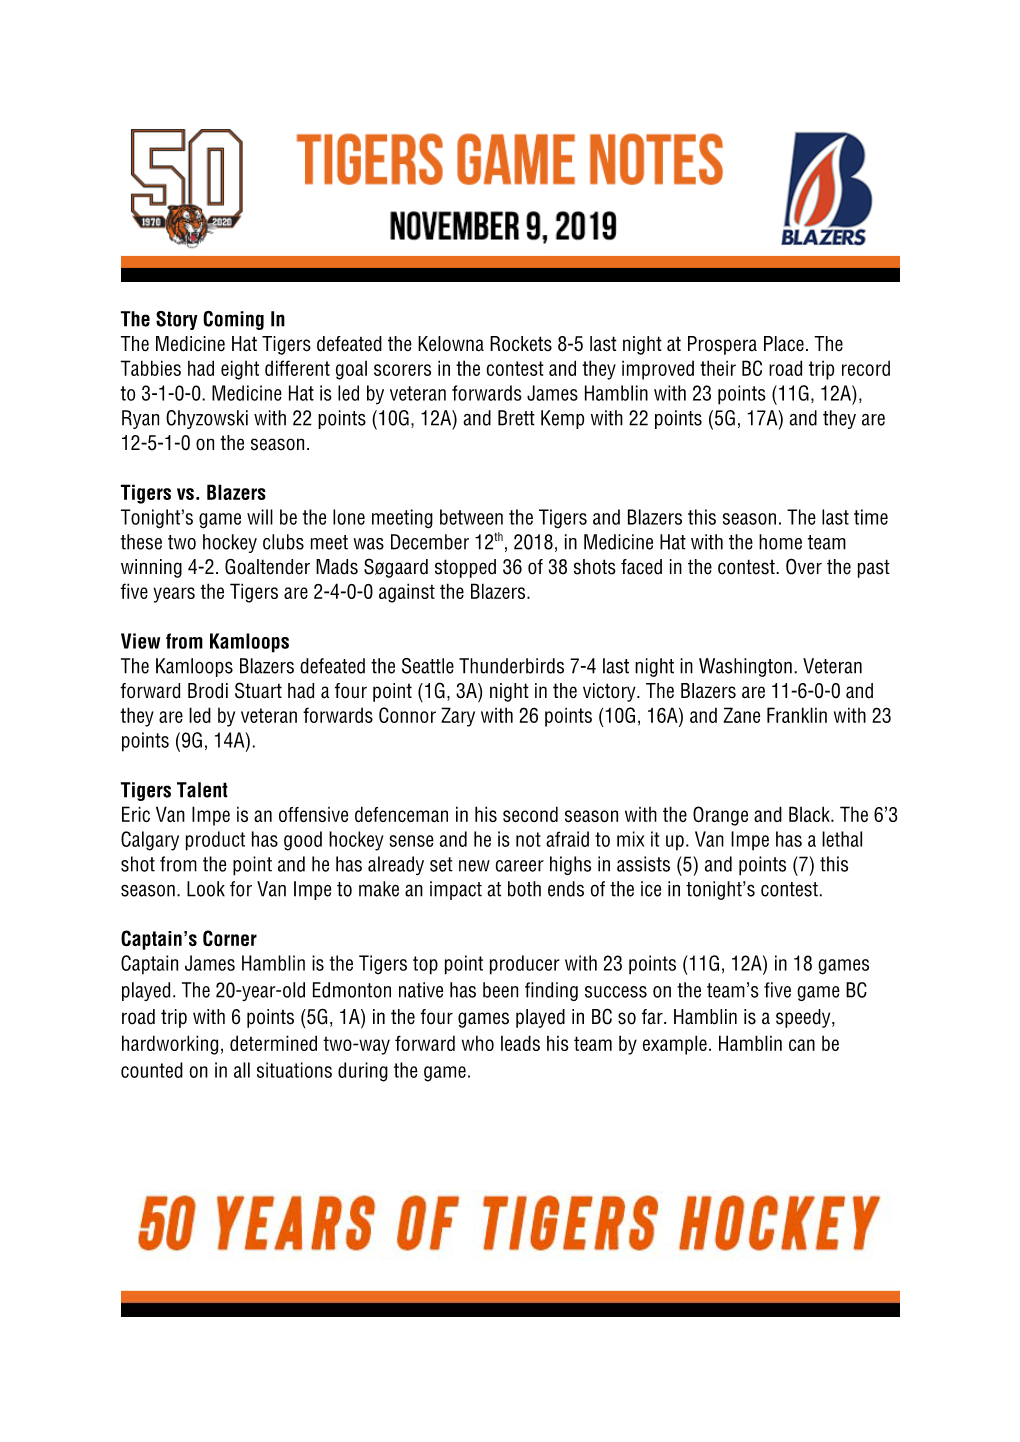 The Story Coming in the Medicine Hat Tigers Defeated the Kelowna Rockets 8-5 Last Night at Prospera Place